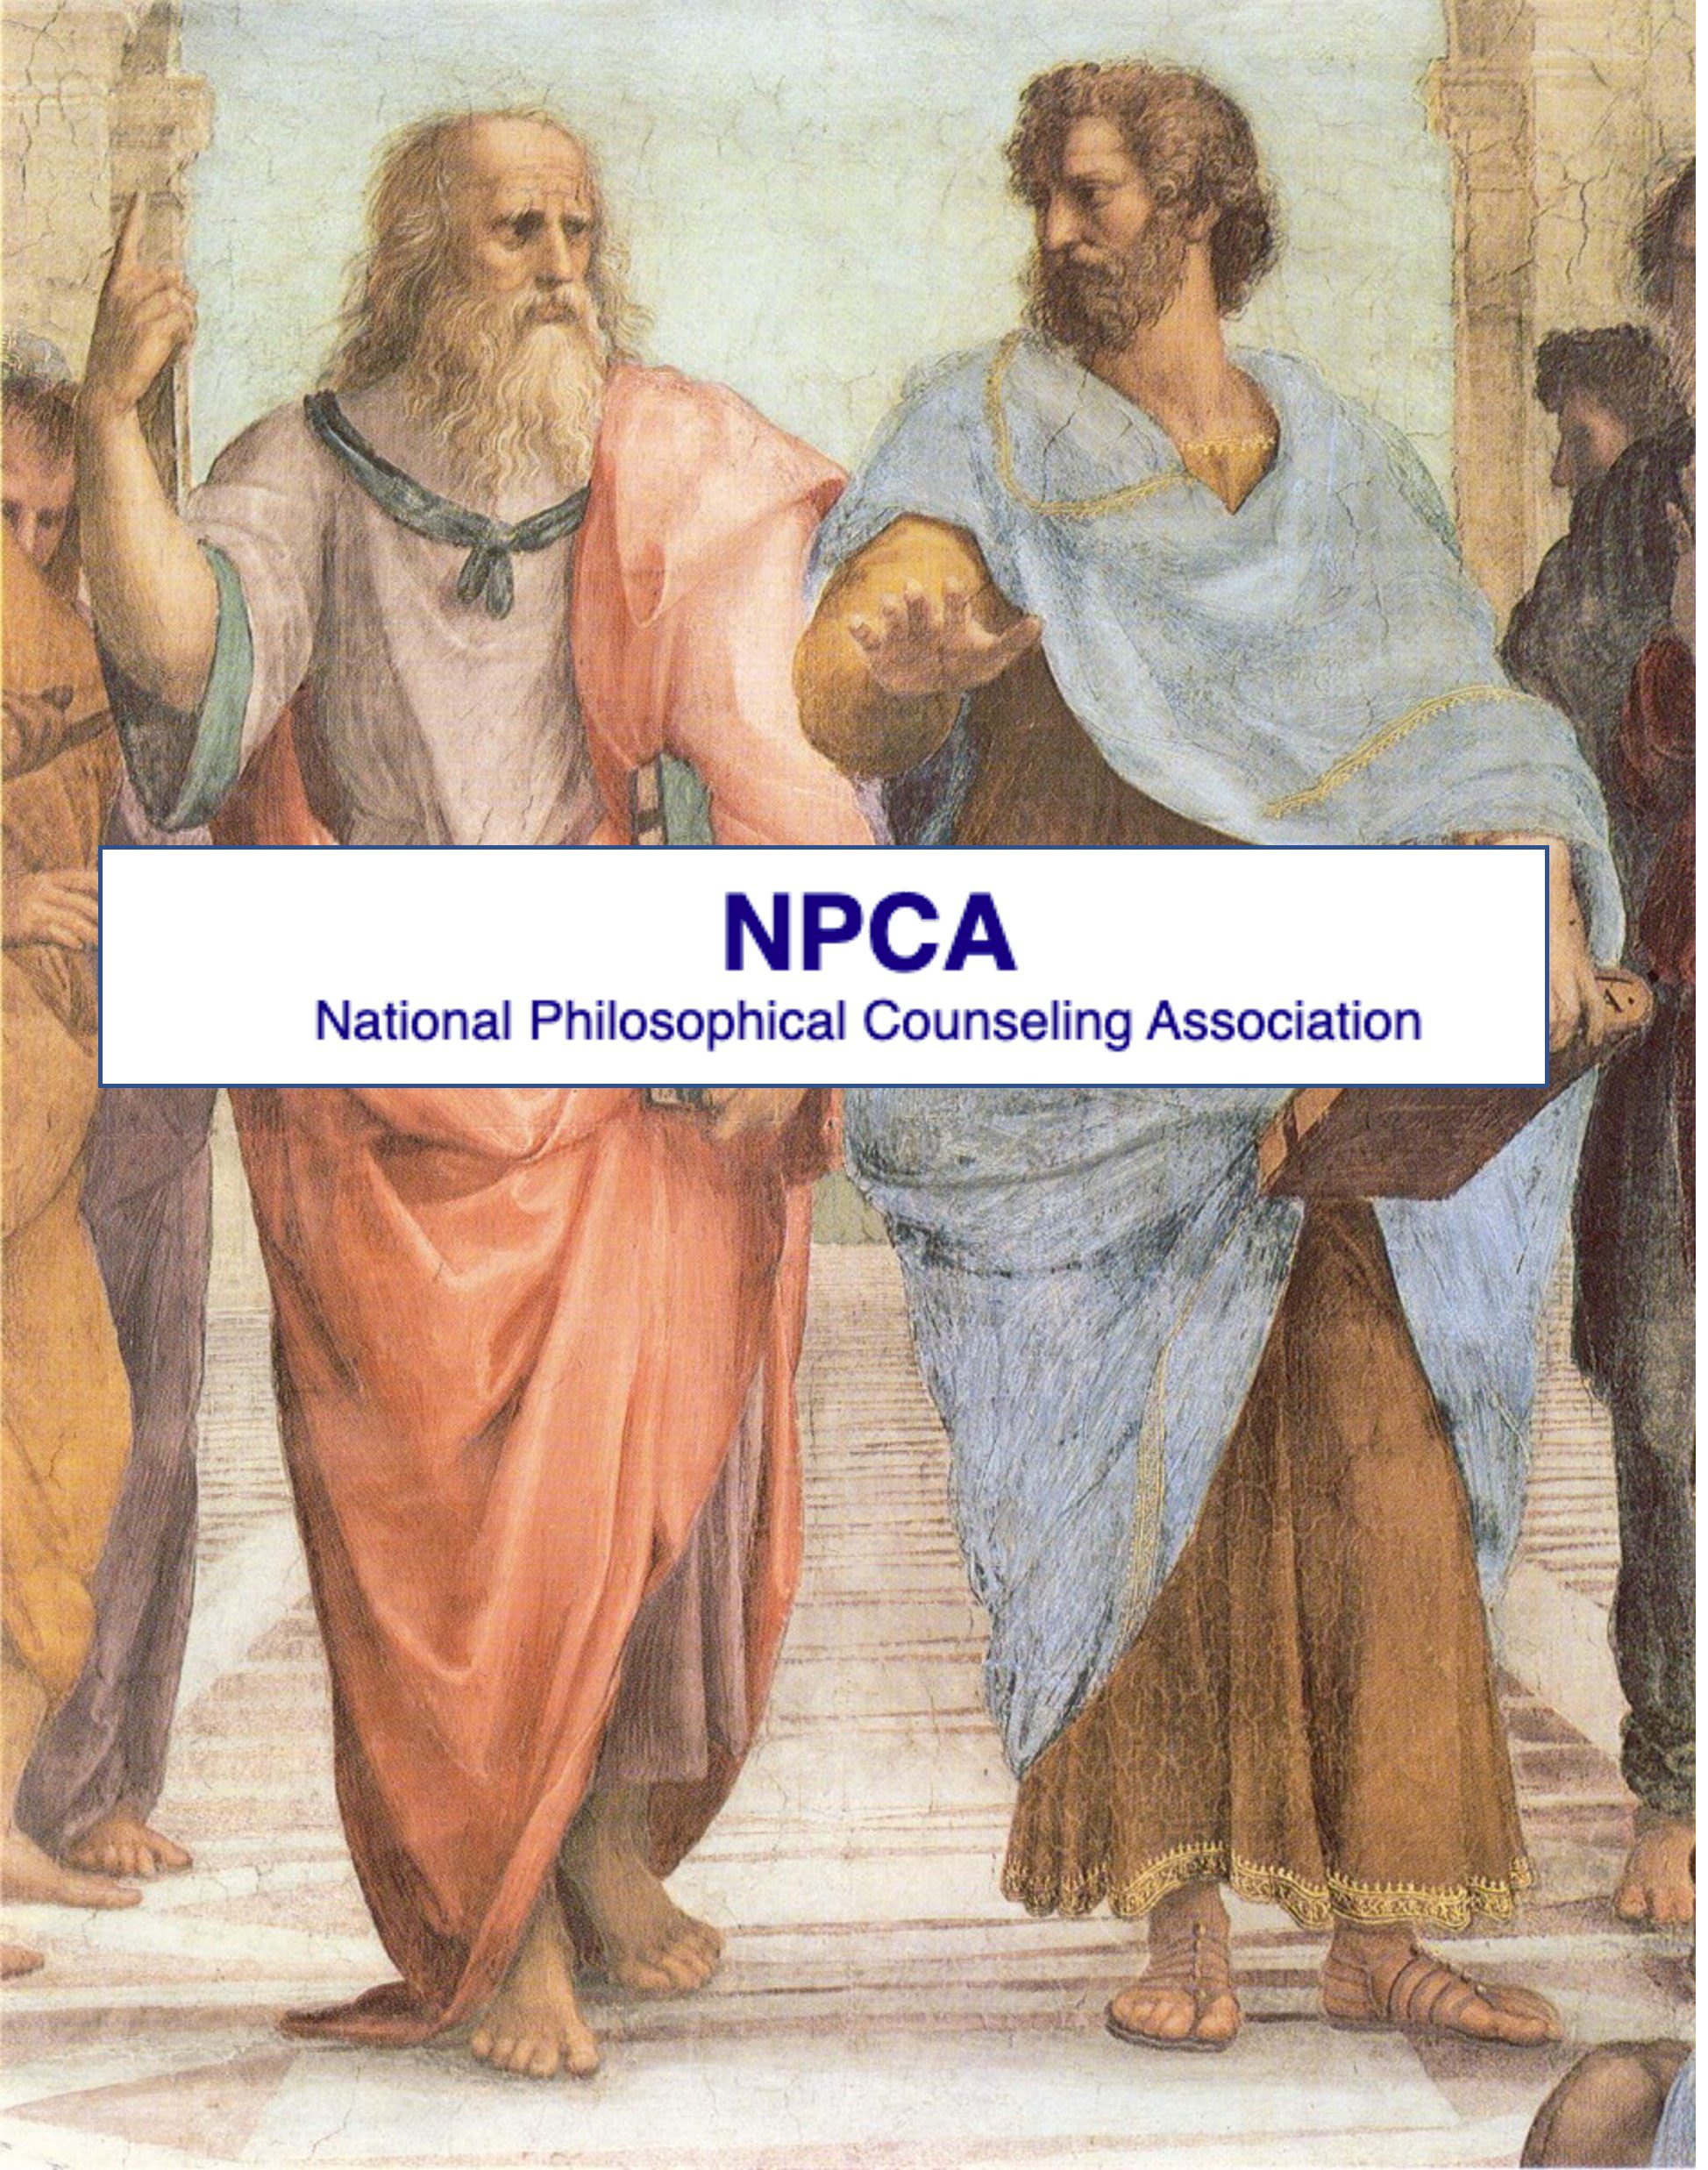 National Philosophical Counseling Association